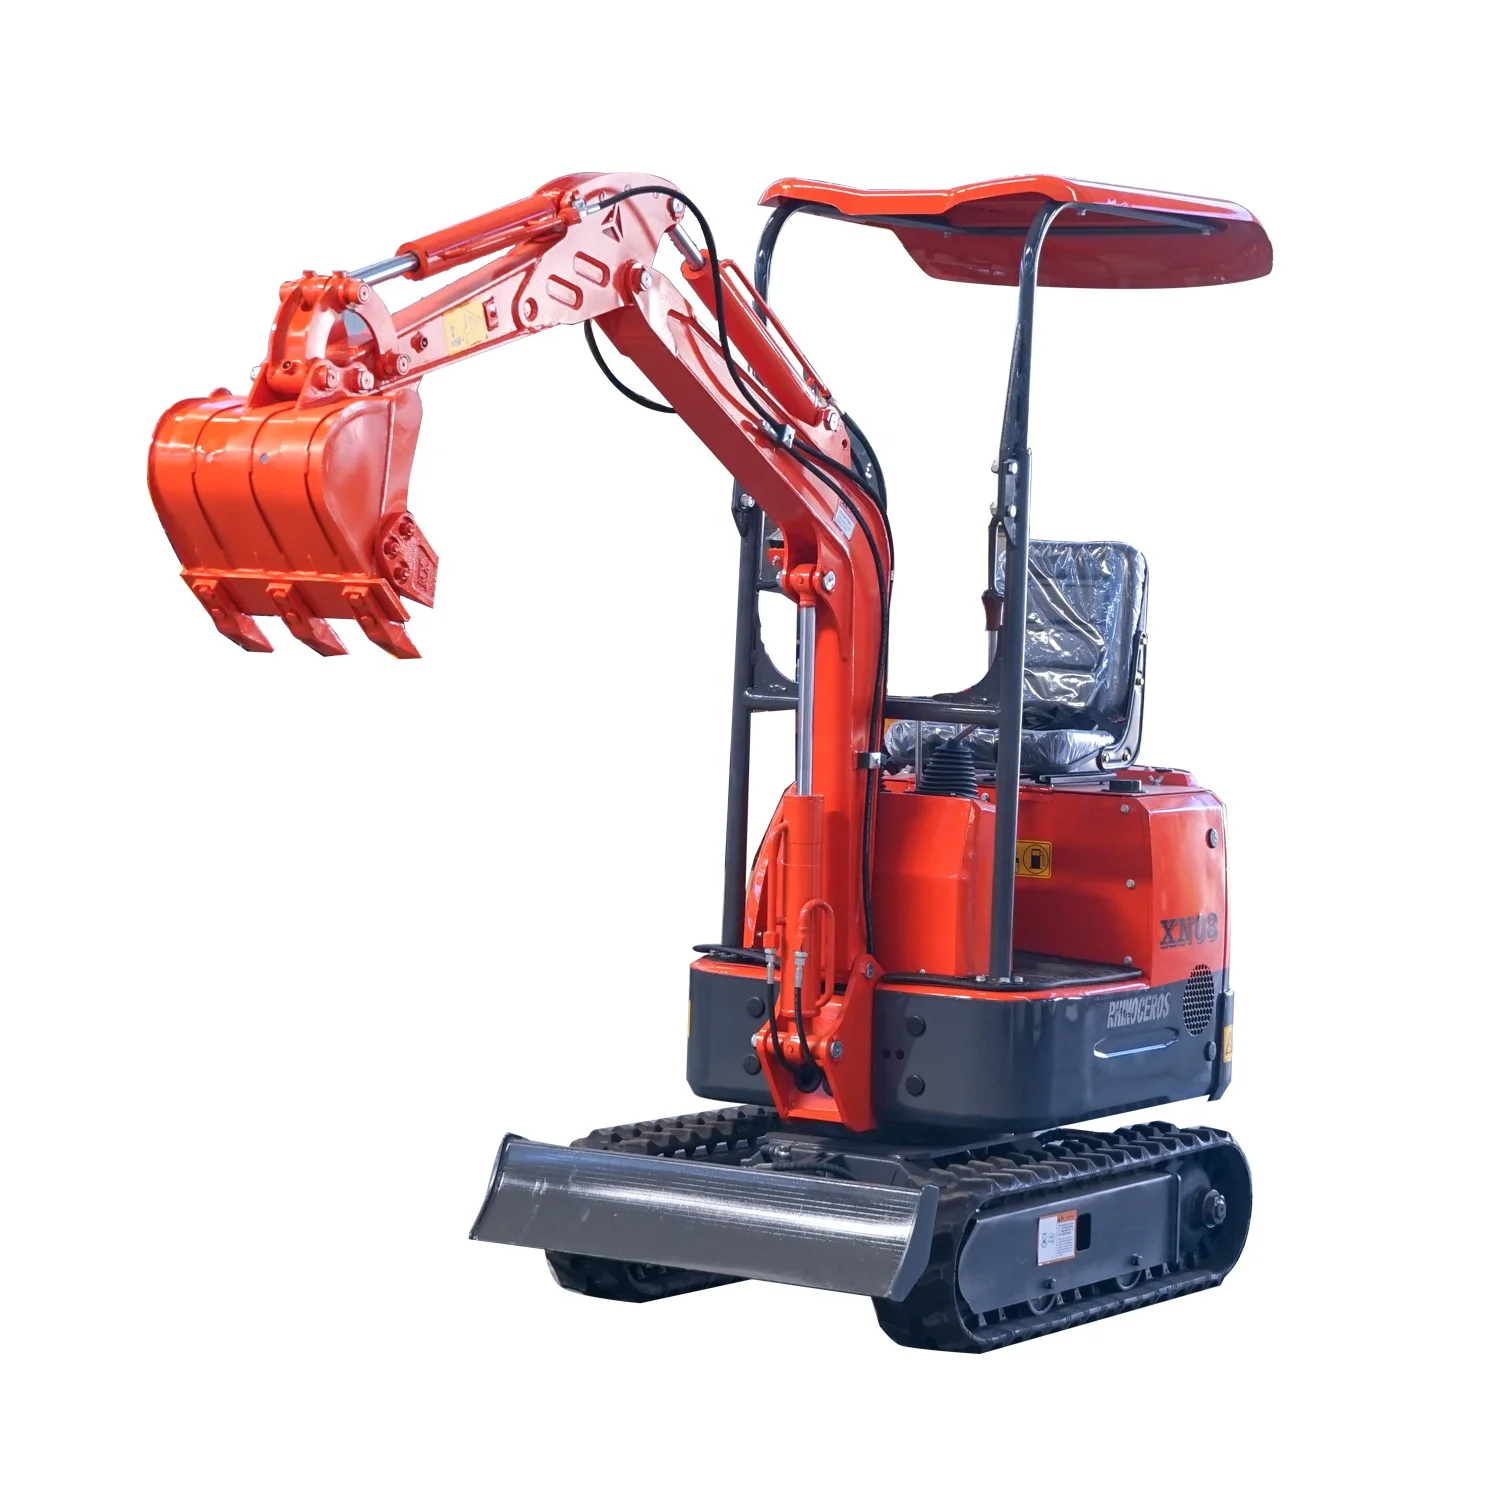 
China mini Excavator 0.8T Small Digger 1 Ton Excavator With Rubber Track 